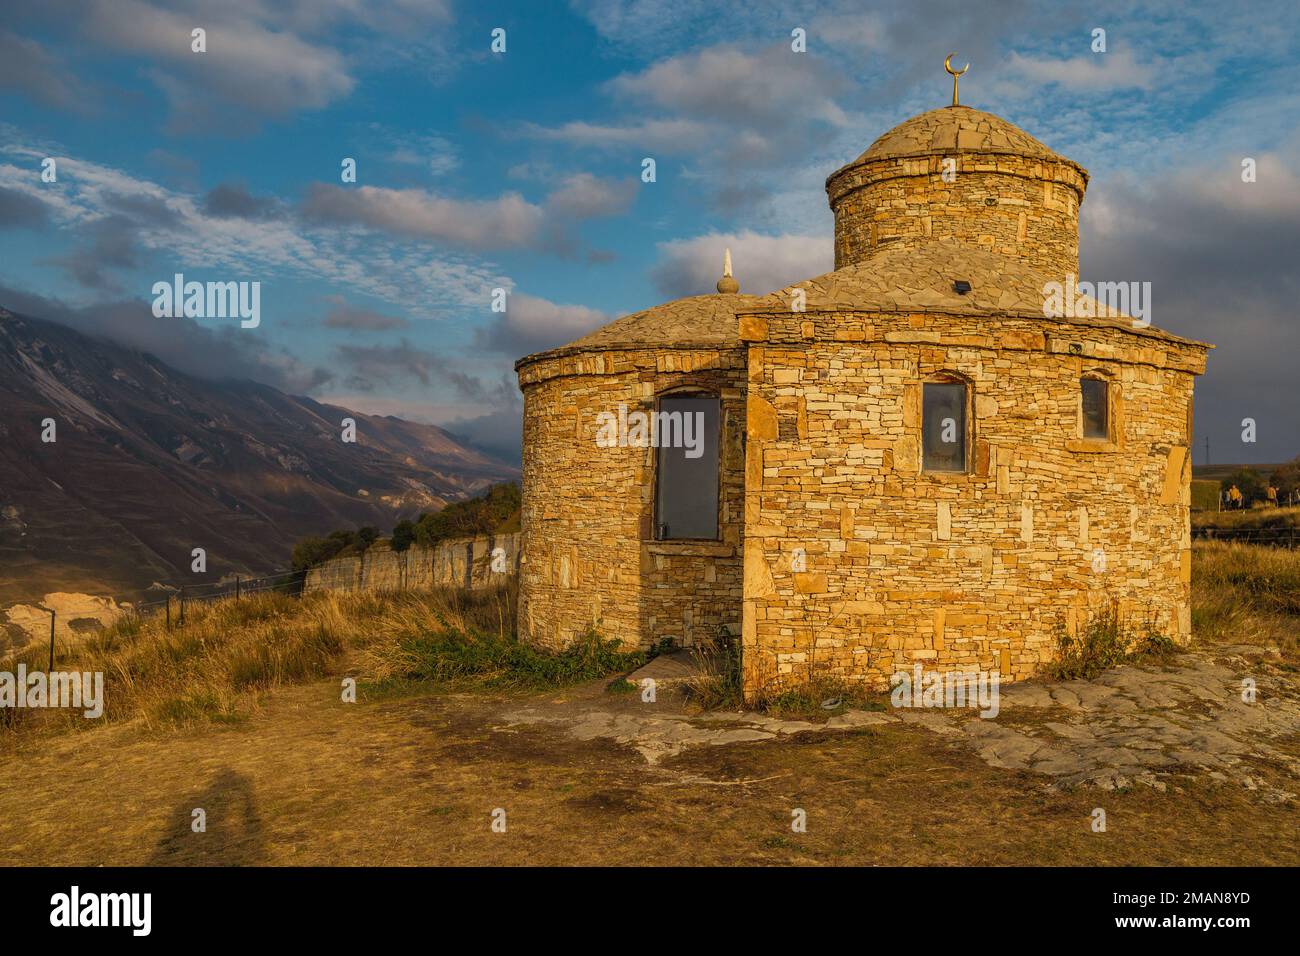 A small stone mosque against the backdrop of picturesque green mountains. Republic of Dagestan, Russia Stock Photo